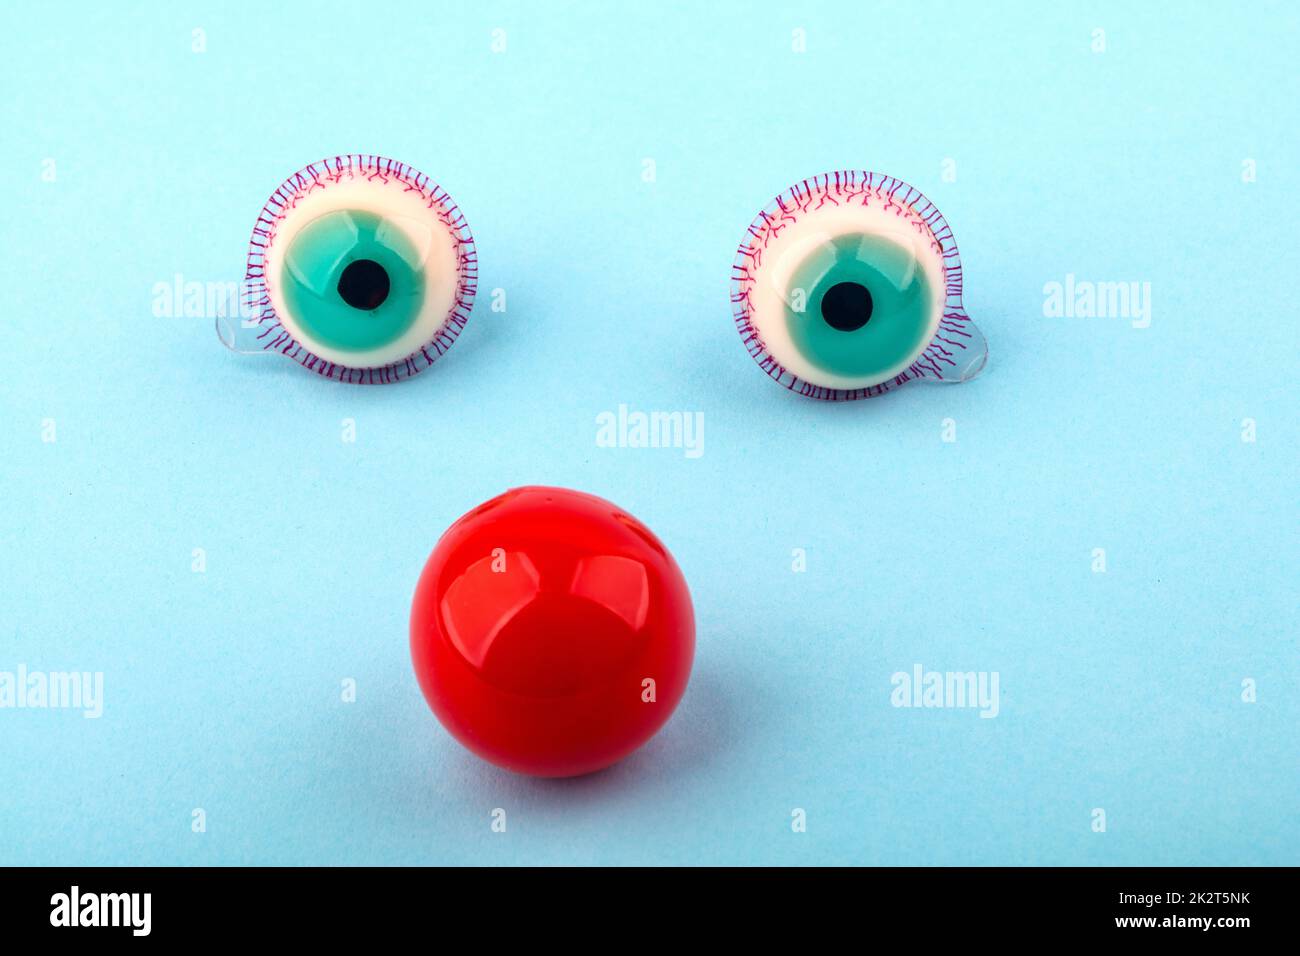 Decorative fruit candy eyes with red nose over light blue background. Conceptual photo using for funny celebration themes. Stock Photo